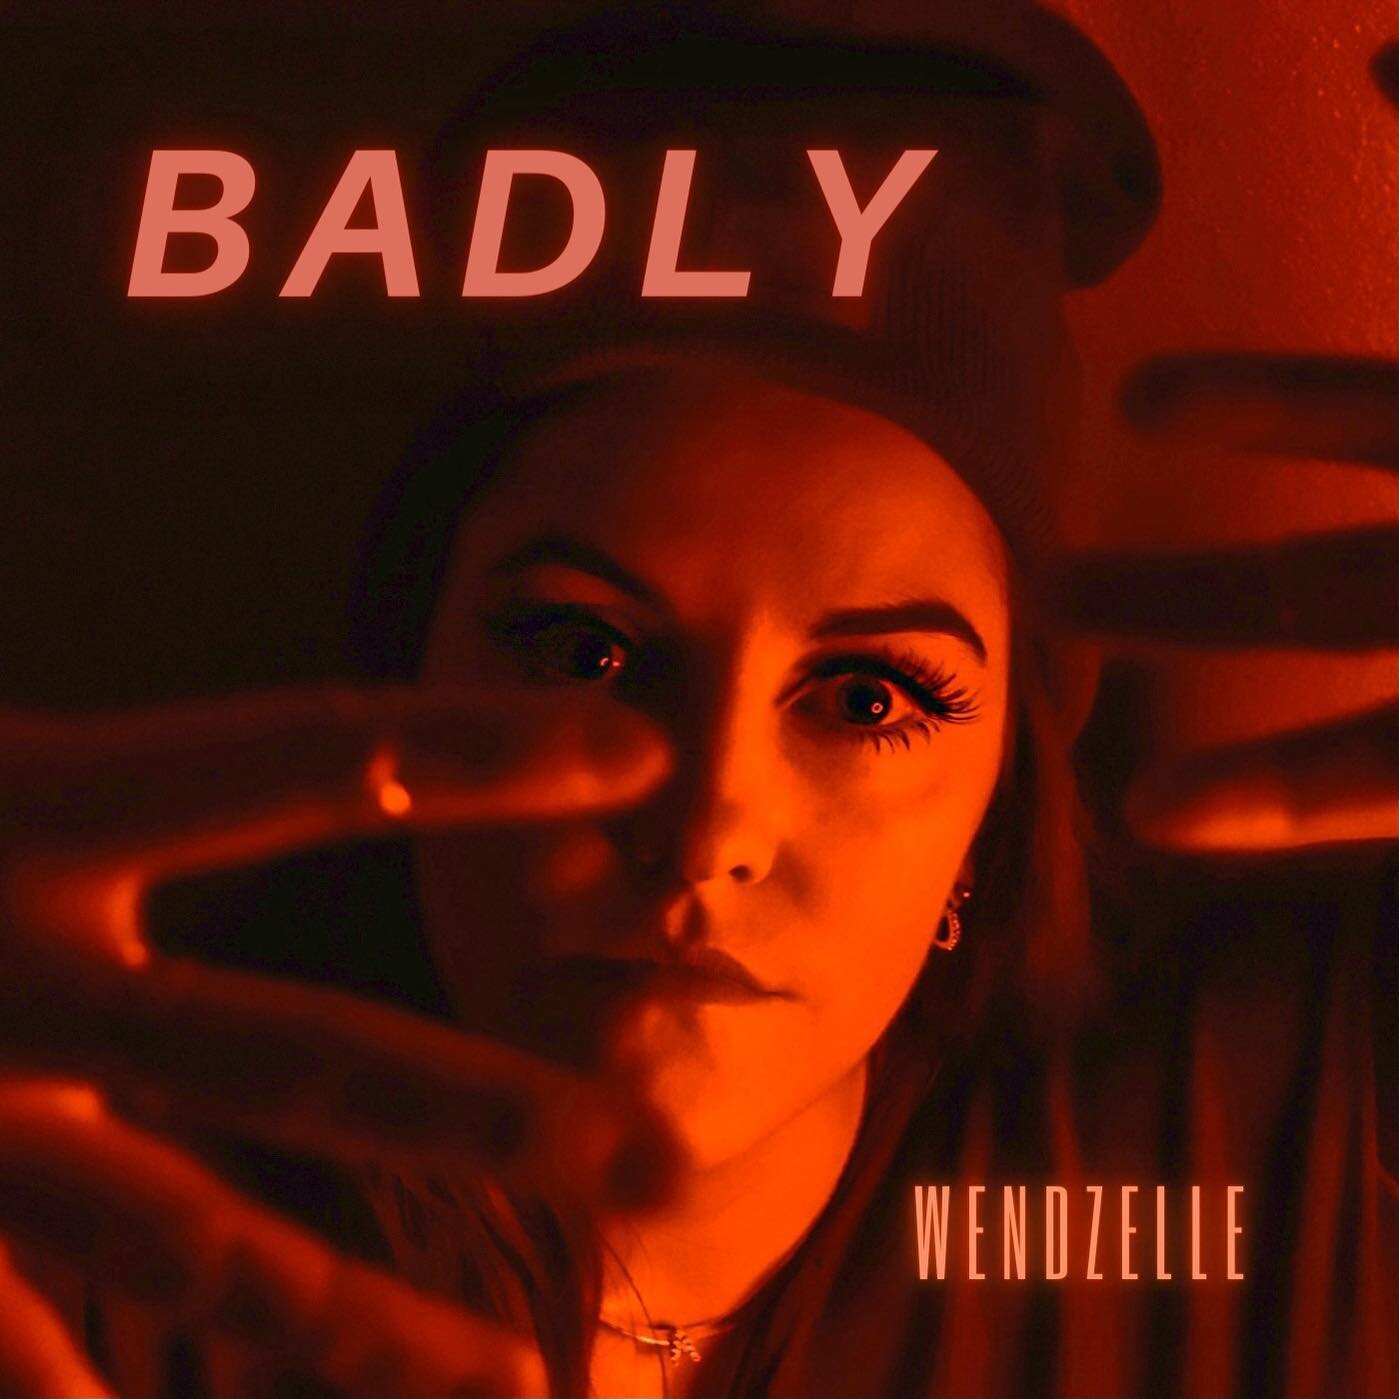 💔 #newmusicalert 💔
&bull;
Mark your calendars for March 31st. 🗓 &ldquo;Badly&rdquo; is coming at you at 12 AM EST and I can&rsquo;t WAIT for you to hear it. 📣 
&bull;
I wrote these lyrics about a relationship that - simply put - went badly. 😩 I 